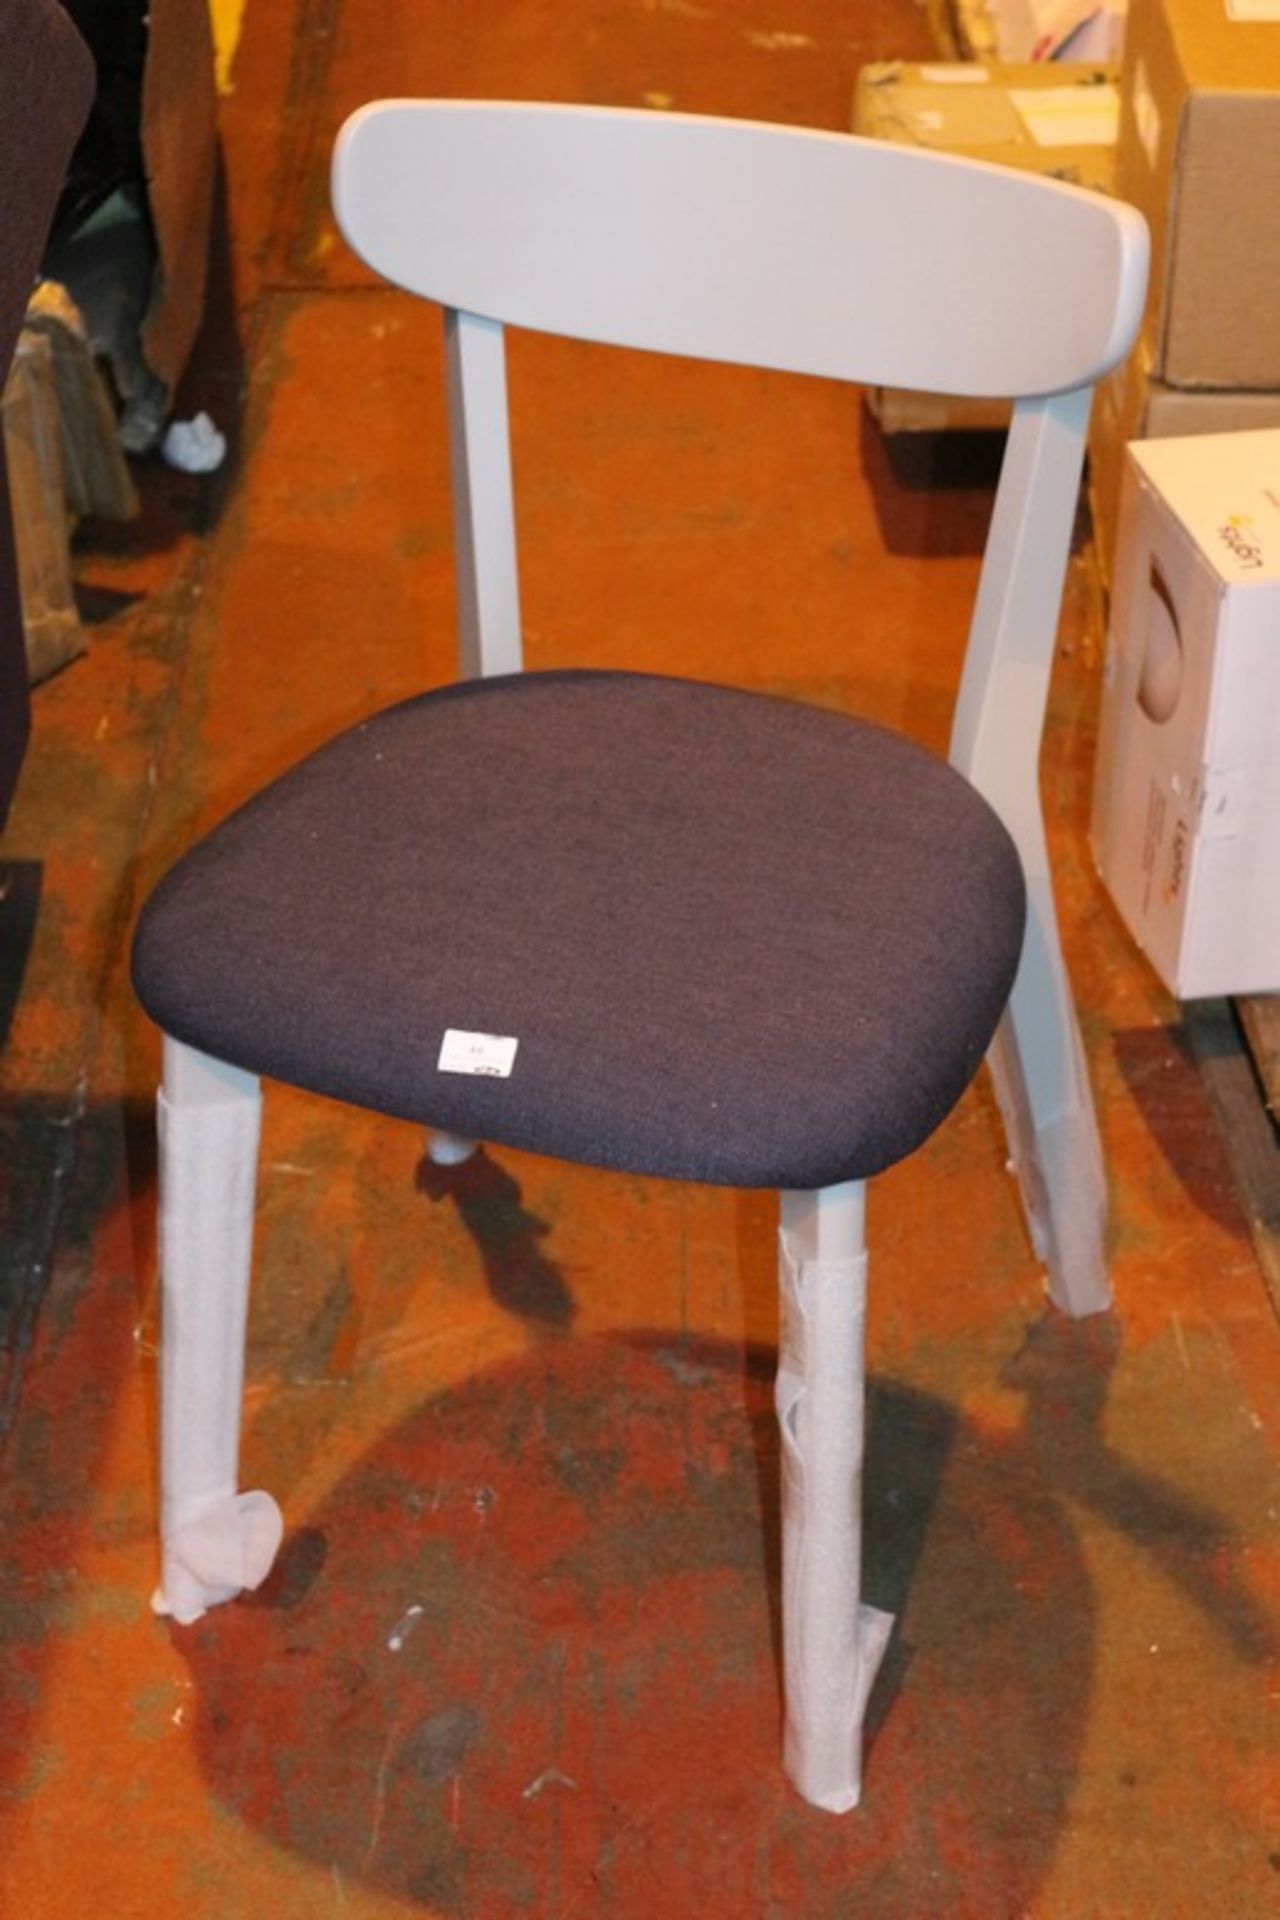 2 x BOXED CLIO GREY WOODEN AND BEIGE FABRIC UPHOLSTERED DESIGNER DINING CHAIR (18064) RRP £75 (3.2.